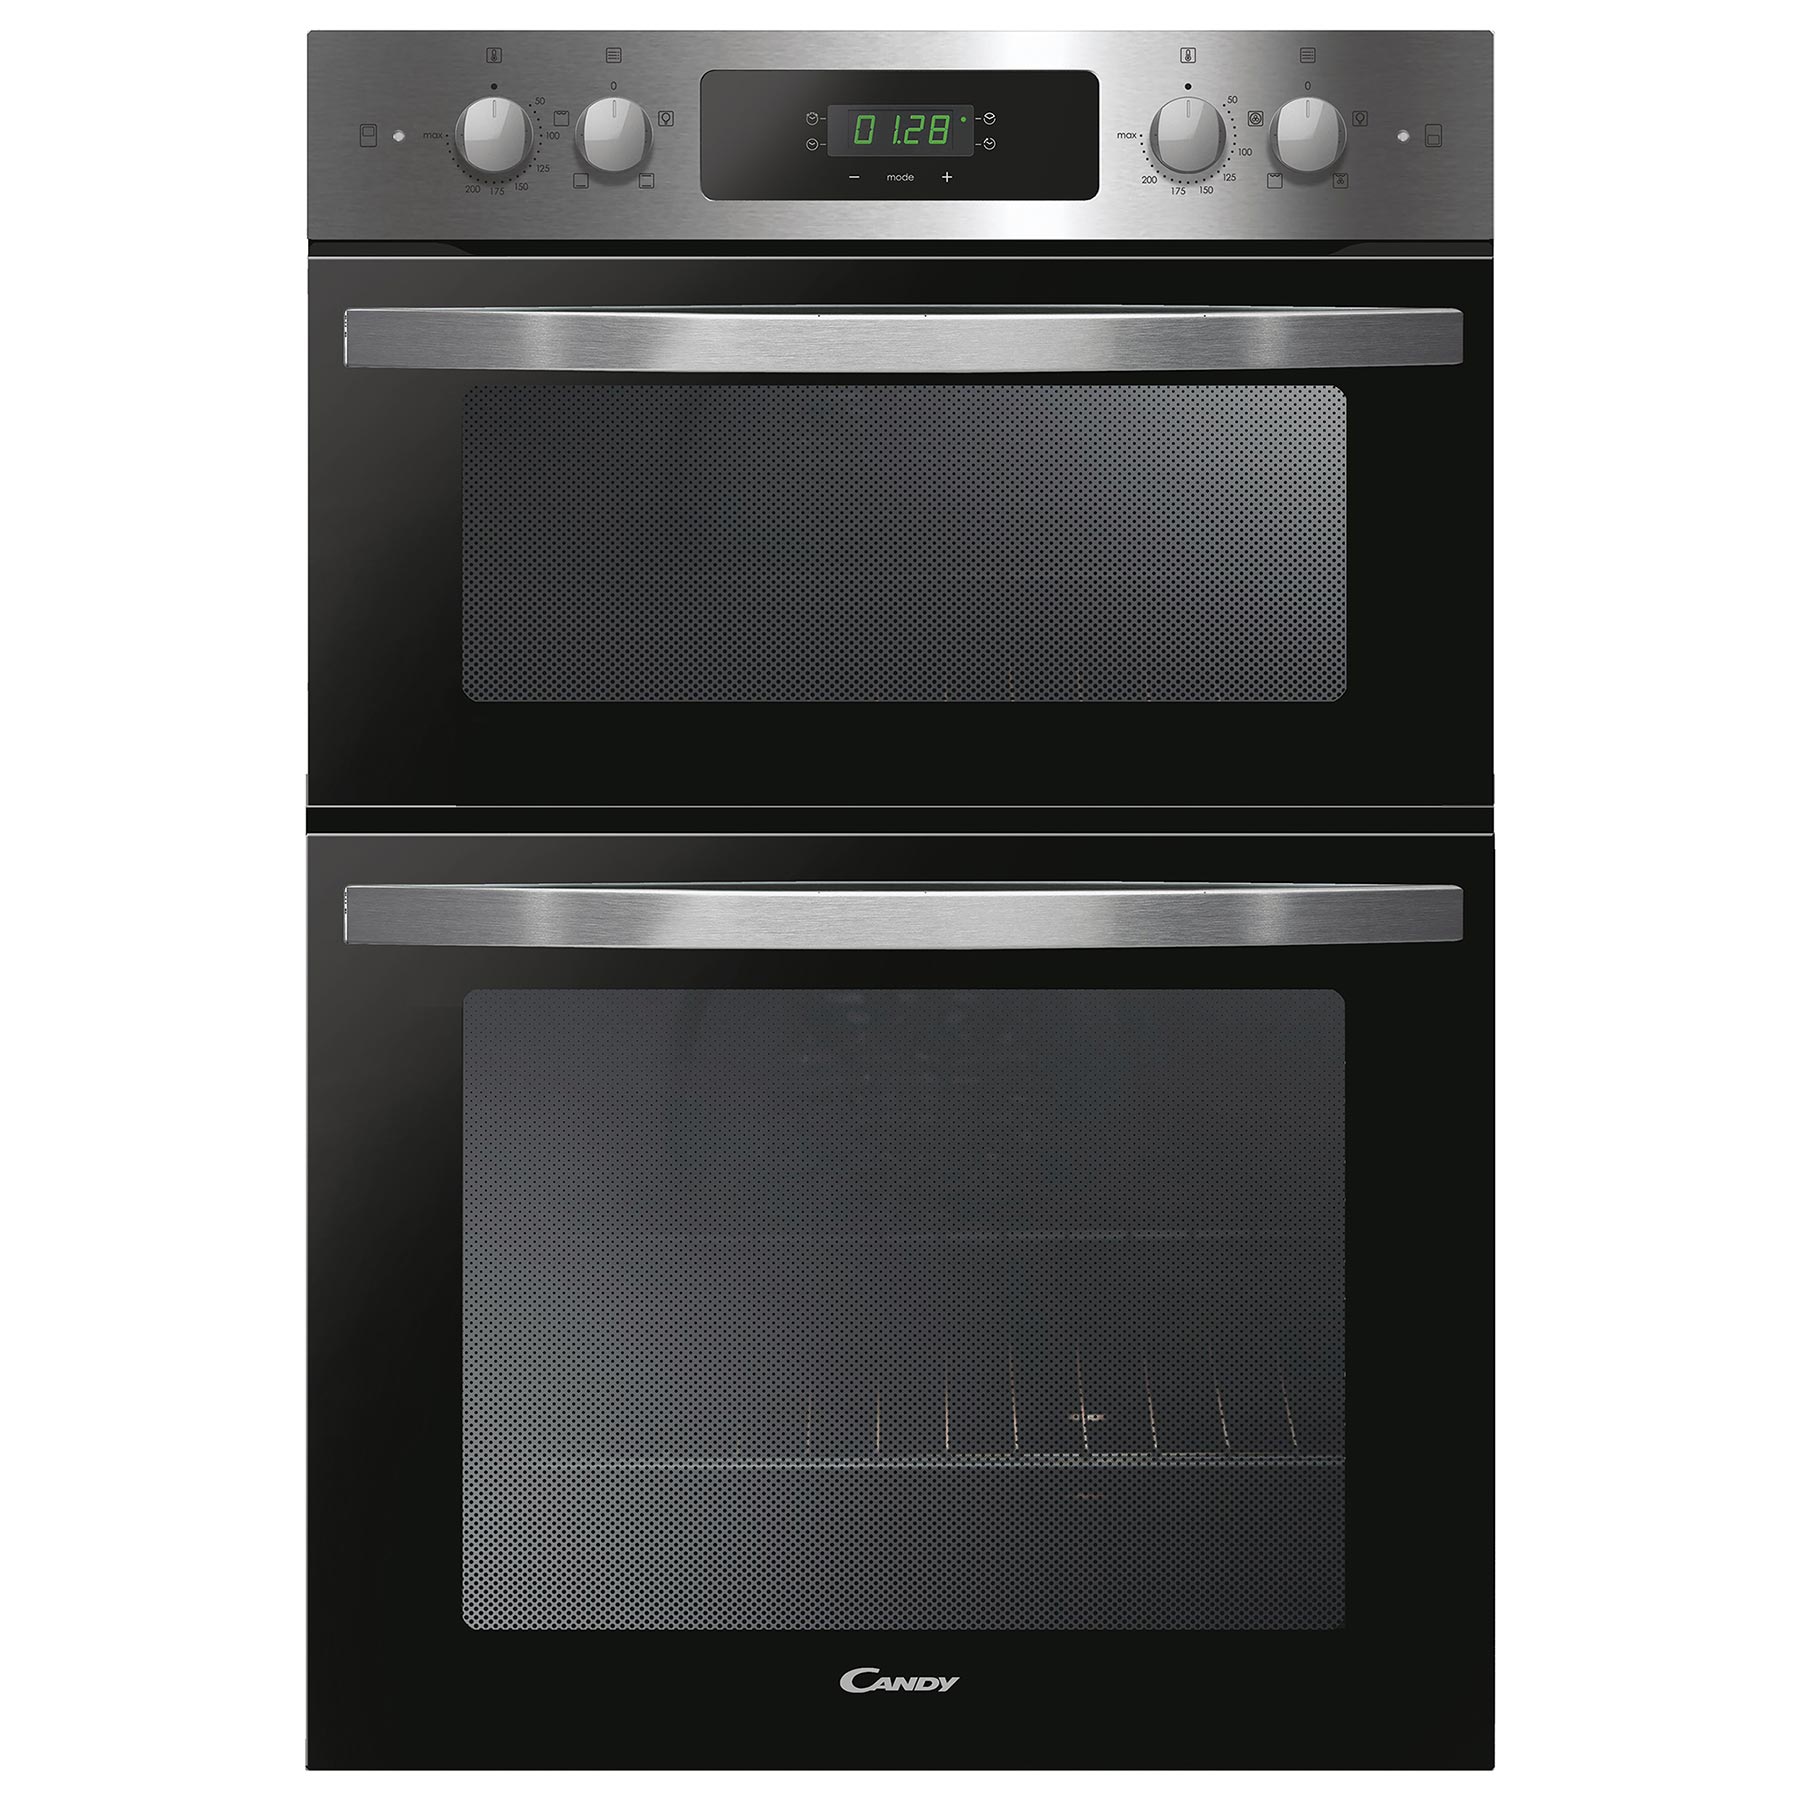 Image of Candy FCI9D405IN Built In Electric Double Oven in St Steel 65L A A Rat